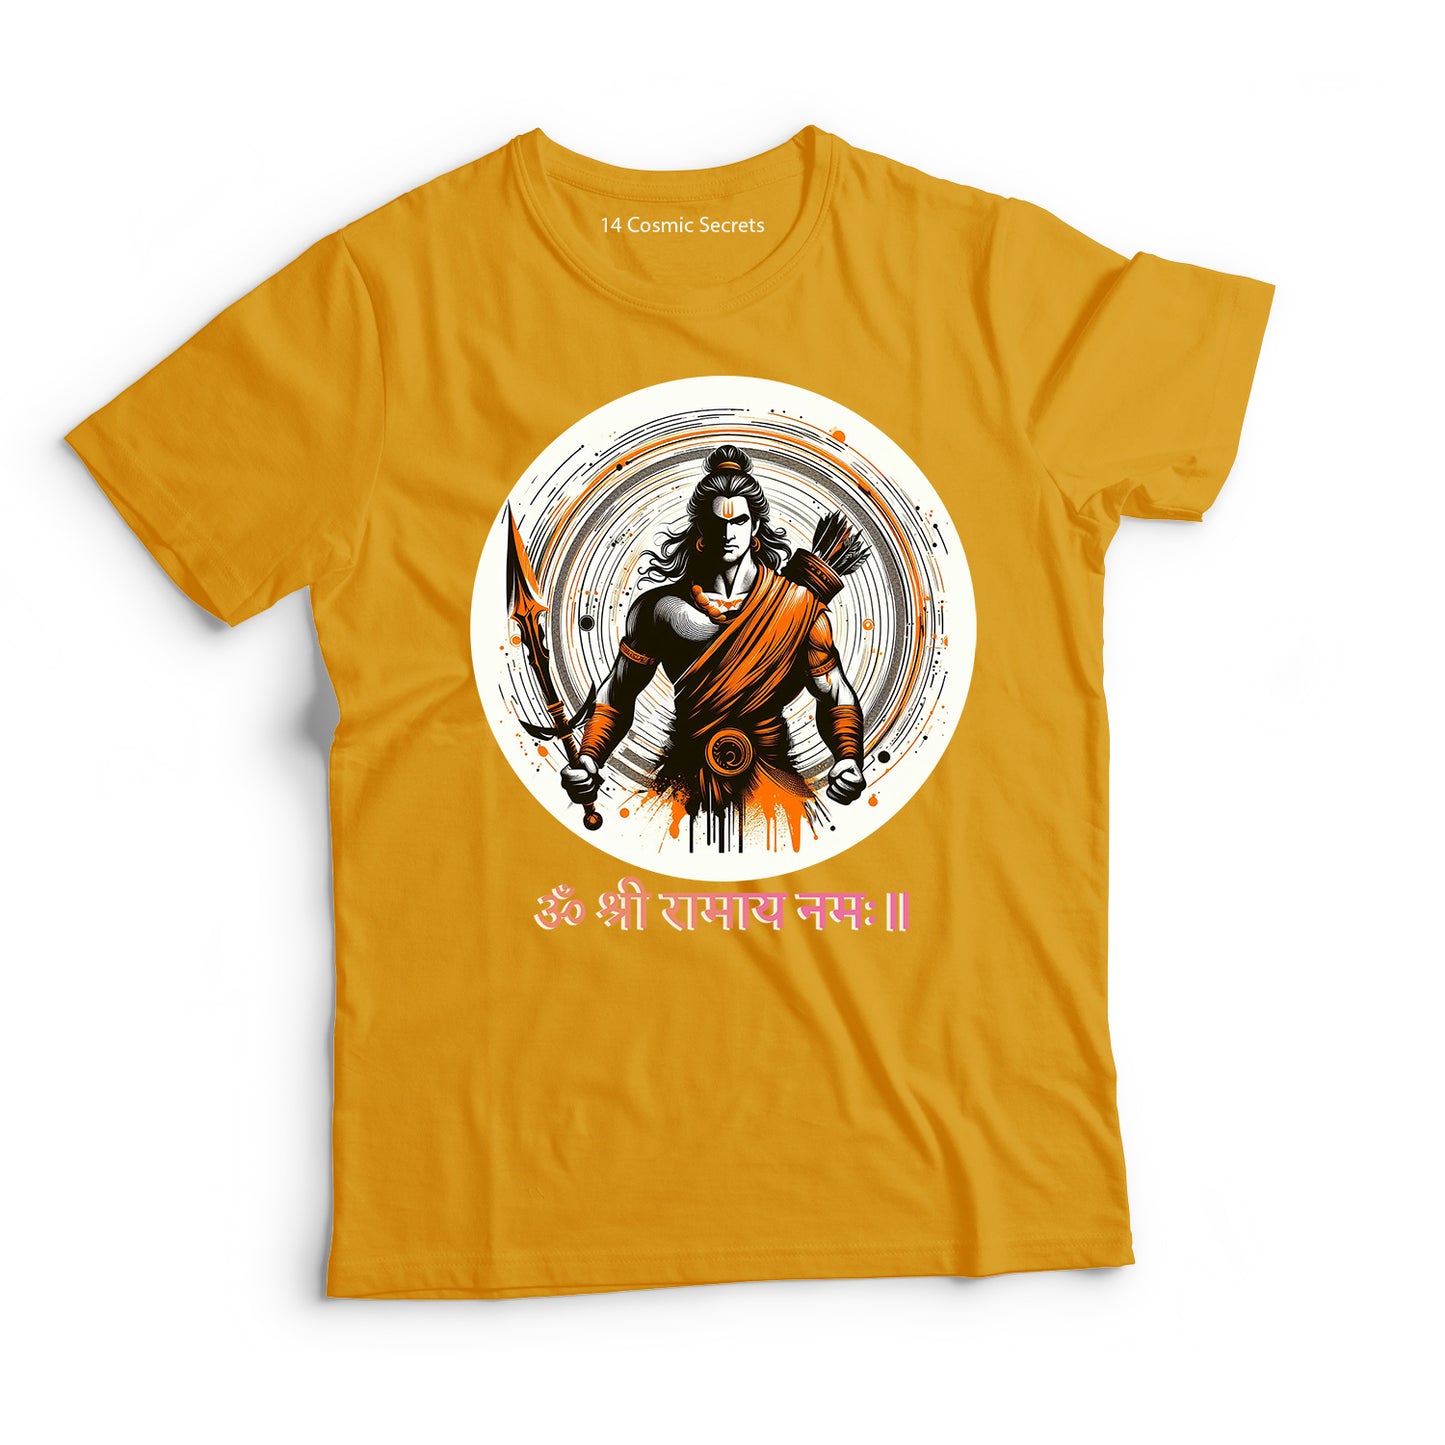 Rama's Reign: The Divine Warrior Graphic Printed T-Shirt for Men Cotton T-Shirt Original Super Heroes of India T-Shirt